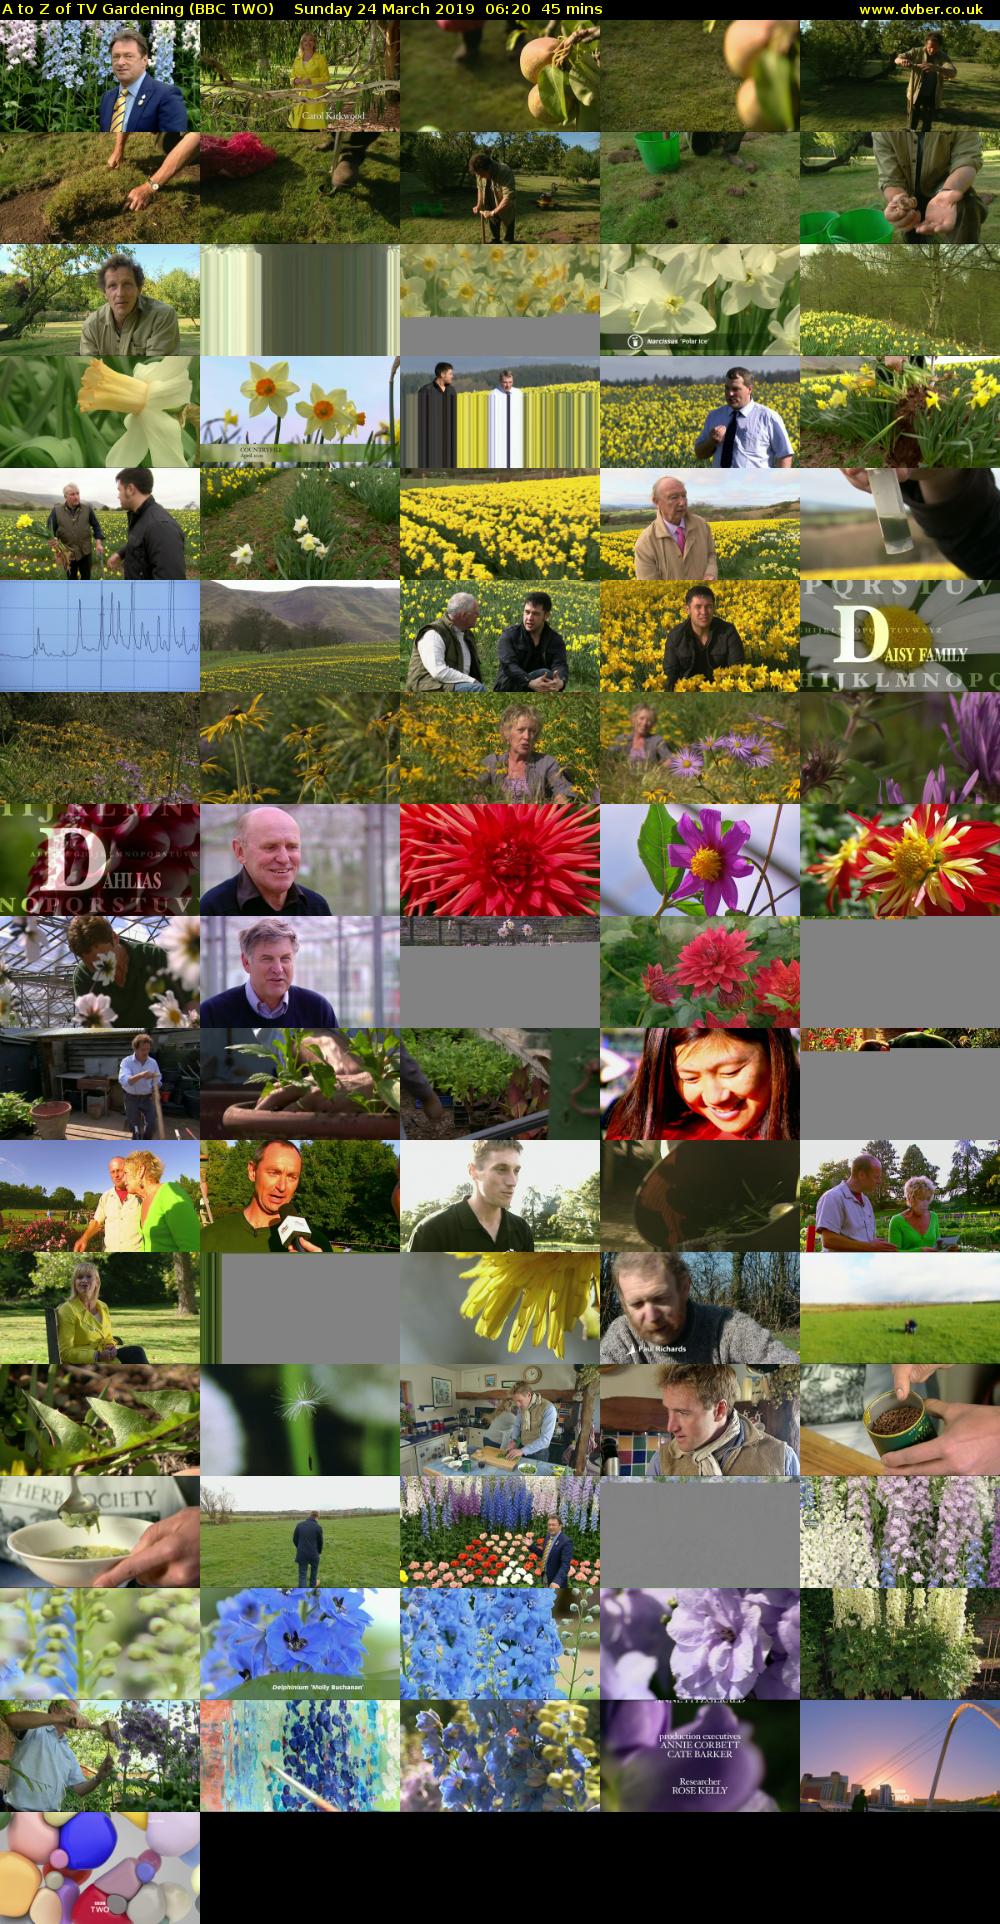 A to Z of TV Gardening (BBC TWO) Sunday 24 March 2019 06:20 - 07:05